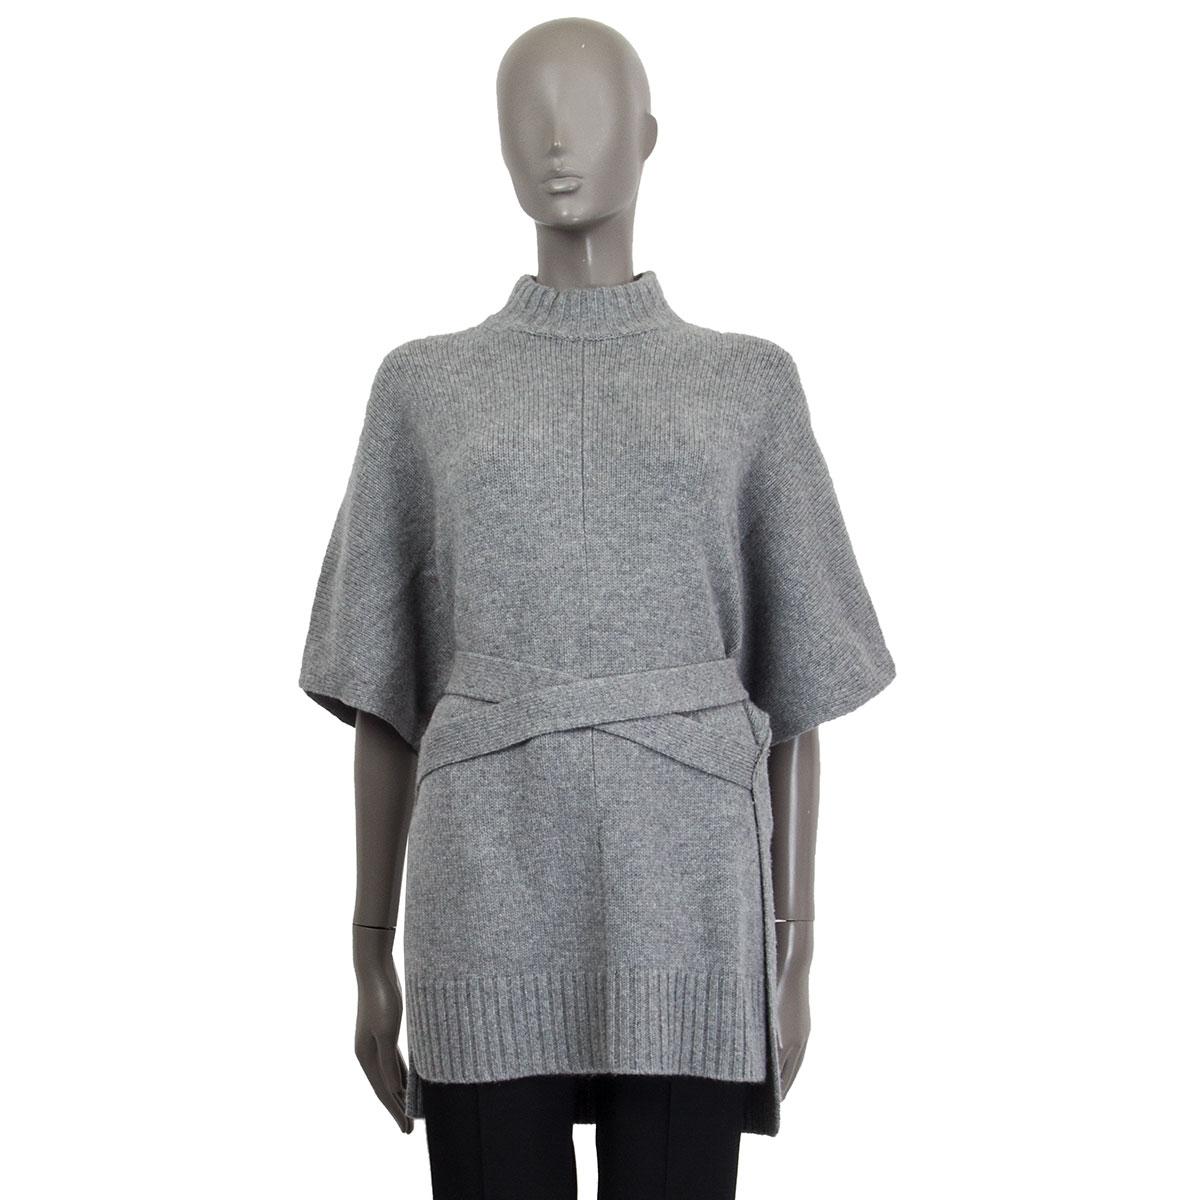 100% authentic Joseph tie-waist sweater in light-gray cashmere (100%) with short-sleeves and deep side-slits. Unlined. Has been worn and is in excellent condition.

Tag Size M
Size M
Shoulder Width 52cm (20.3in)
Bust 106cm (41.3in)
Waist 98cm